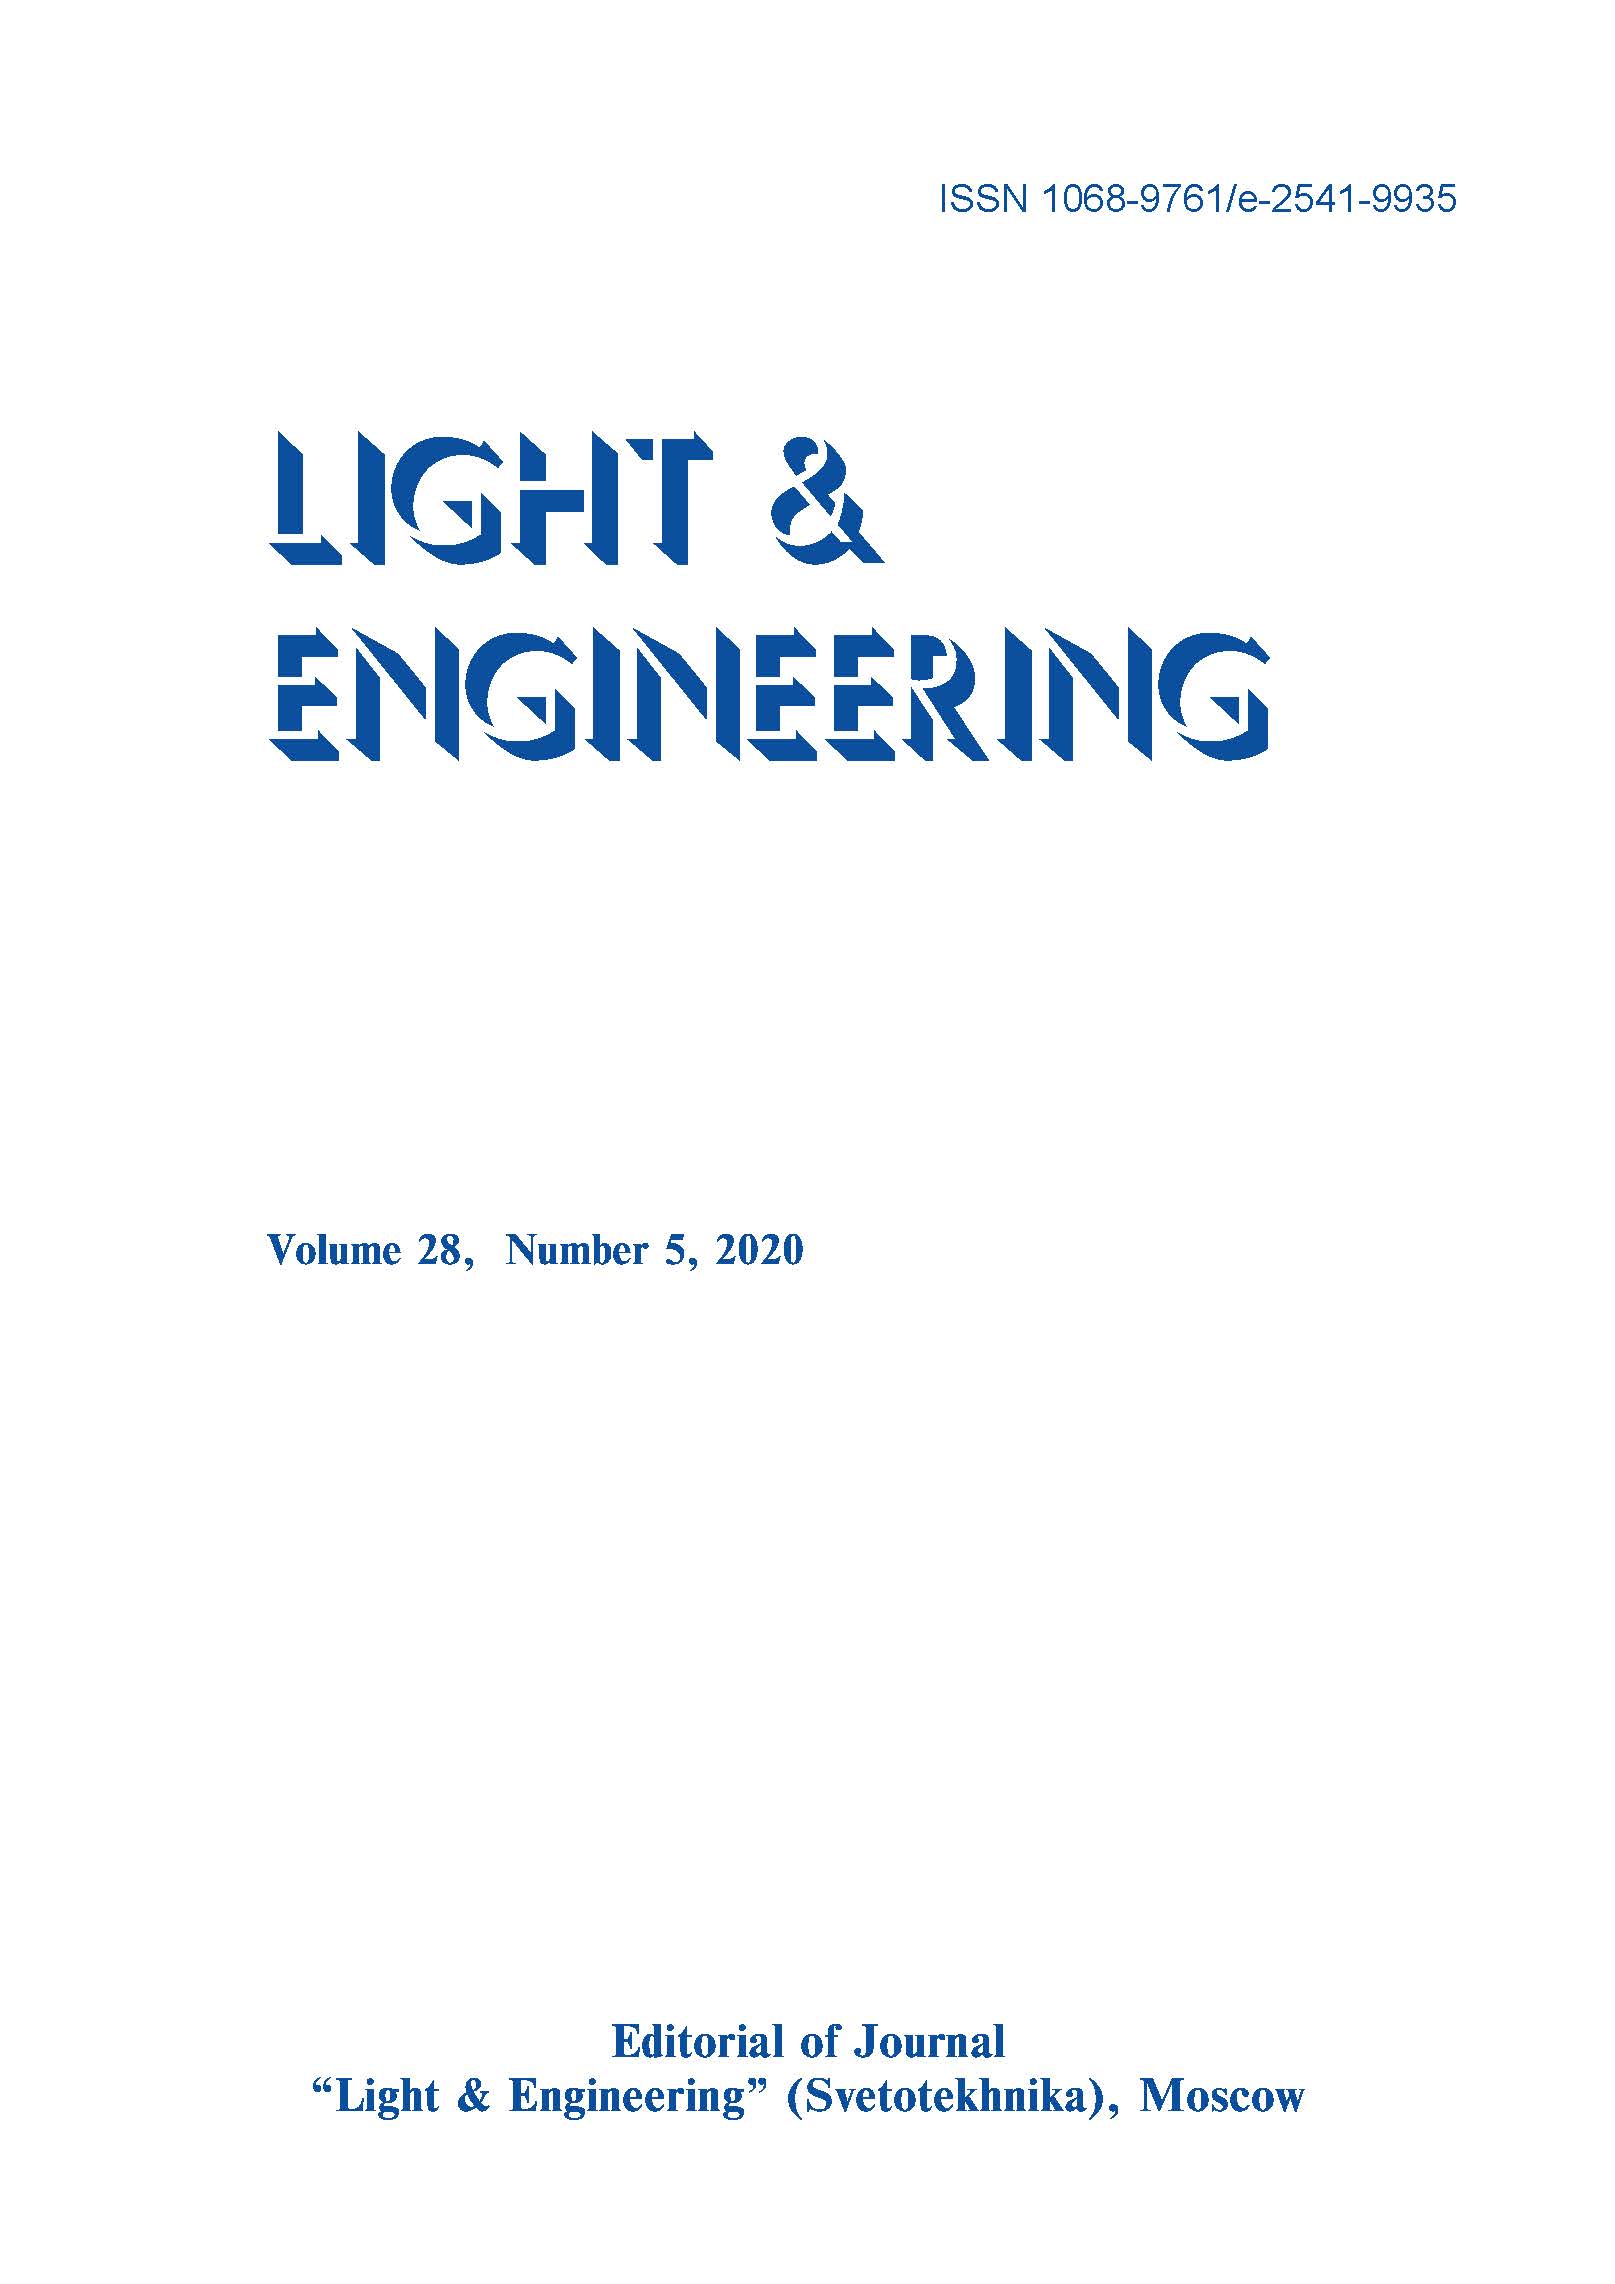 Contemporary System Of Direct Broadband Optical Monitoring Of Thickness Of Spray Optical Coatings Light & Engineering Vol. 28, No. 5